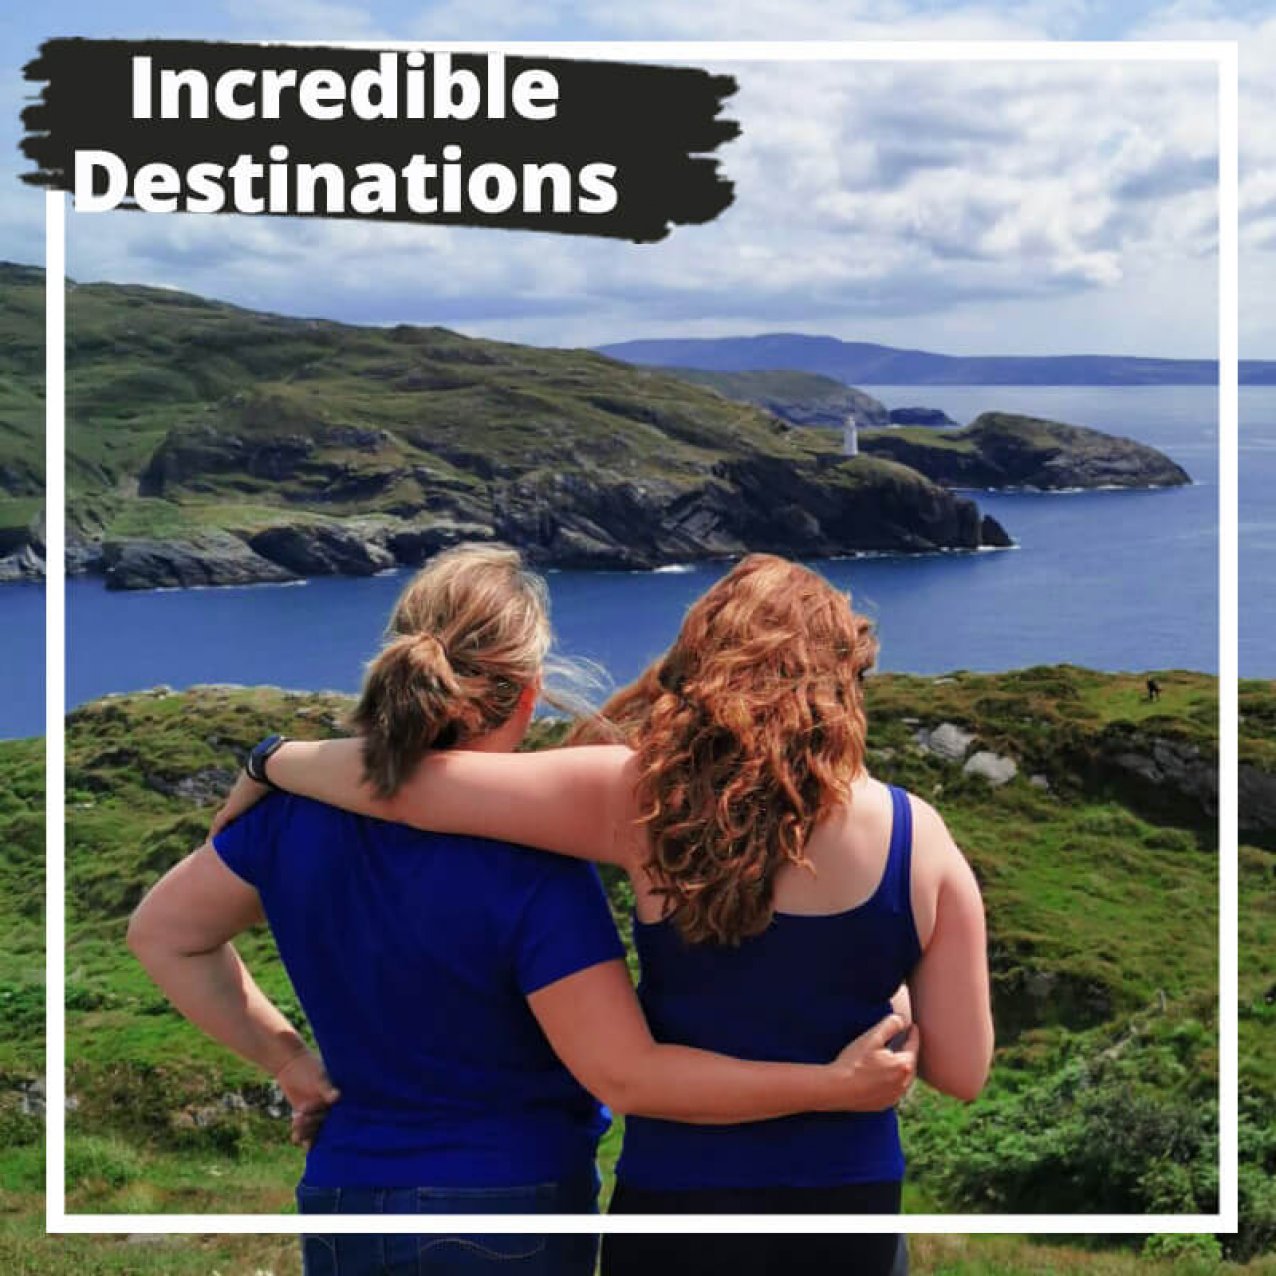 Incredible Destinations with a mum and daughter hugging